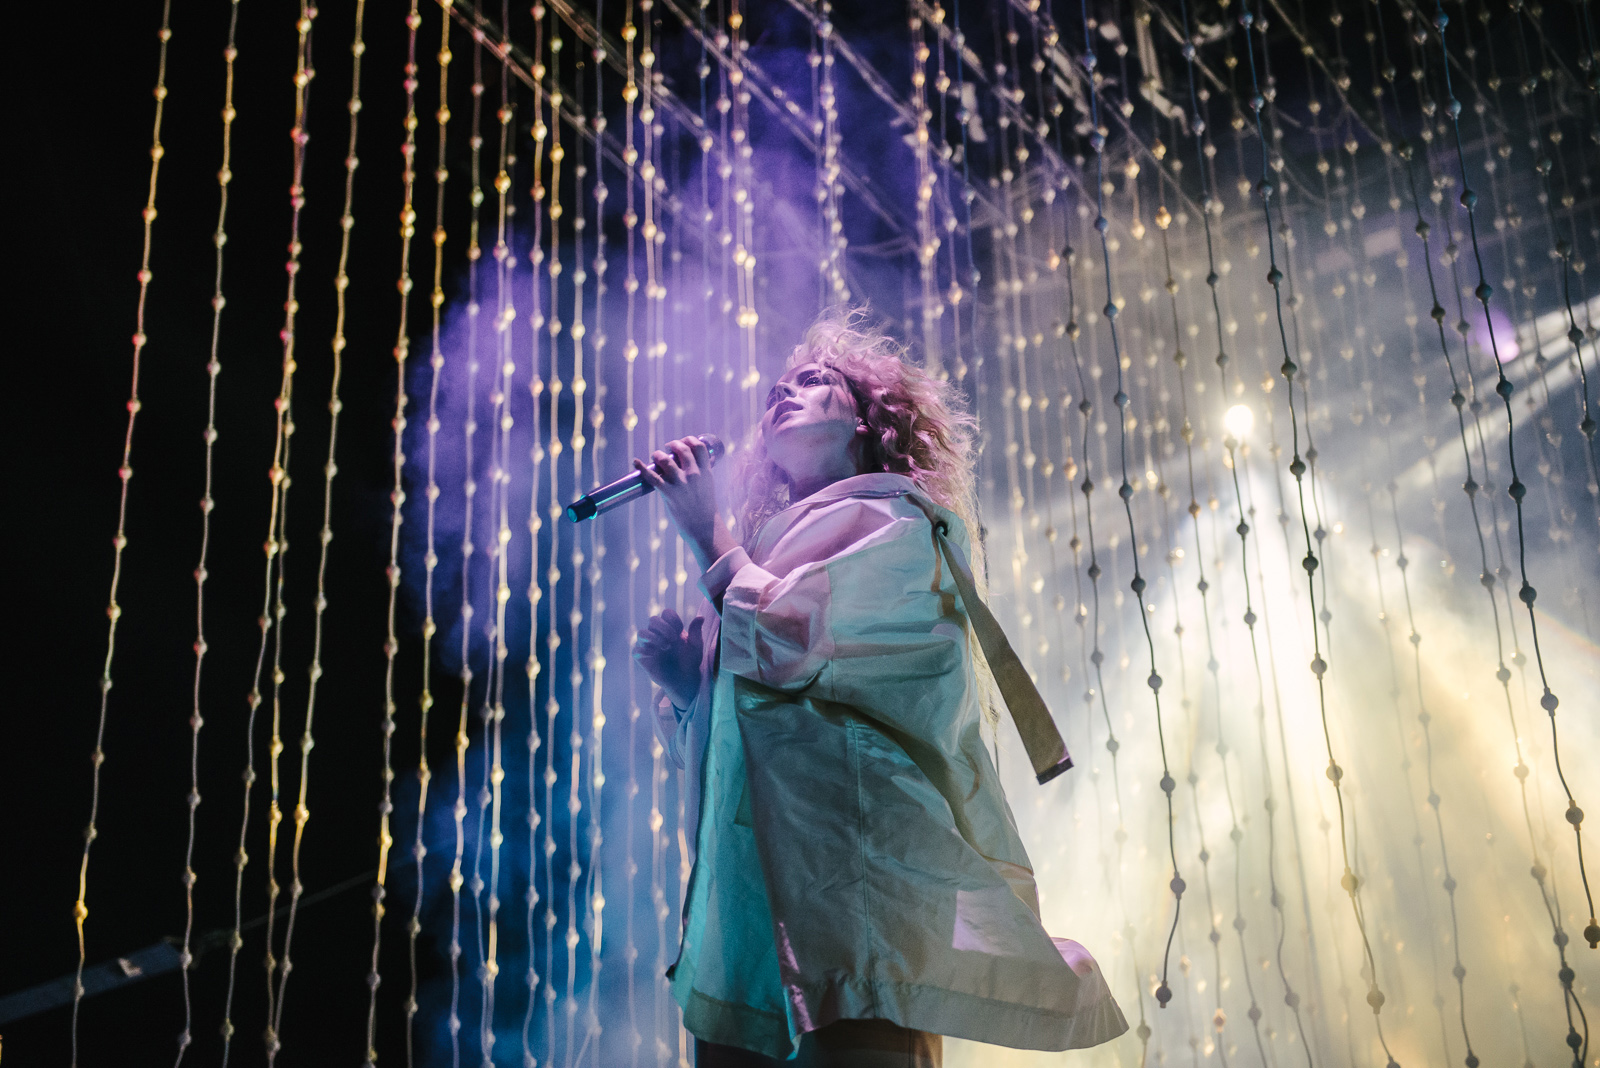 Purity Ring & Black Dresses Team Up to Release New Single 